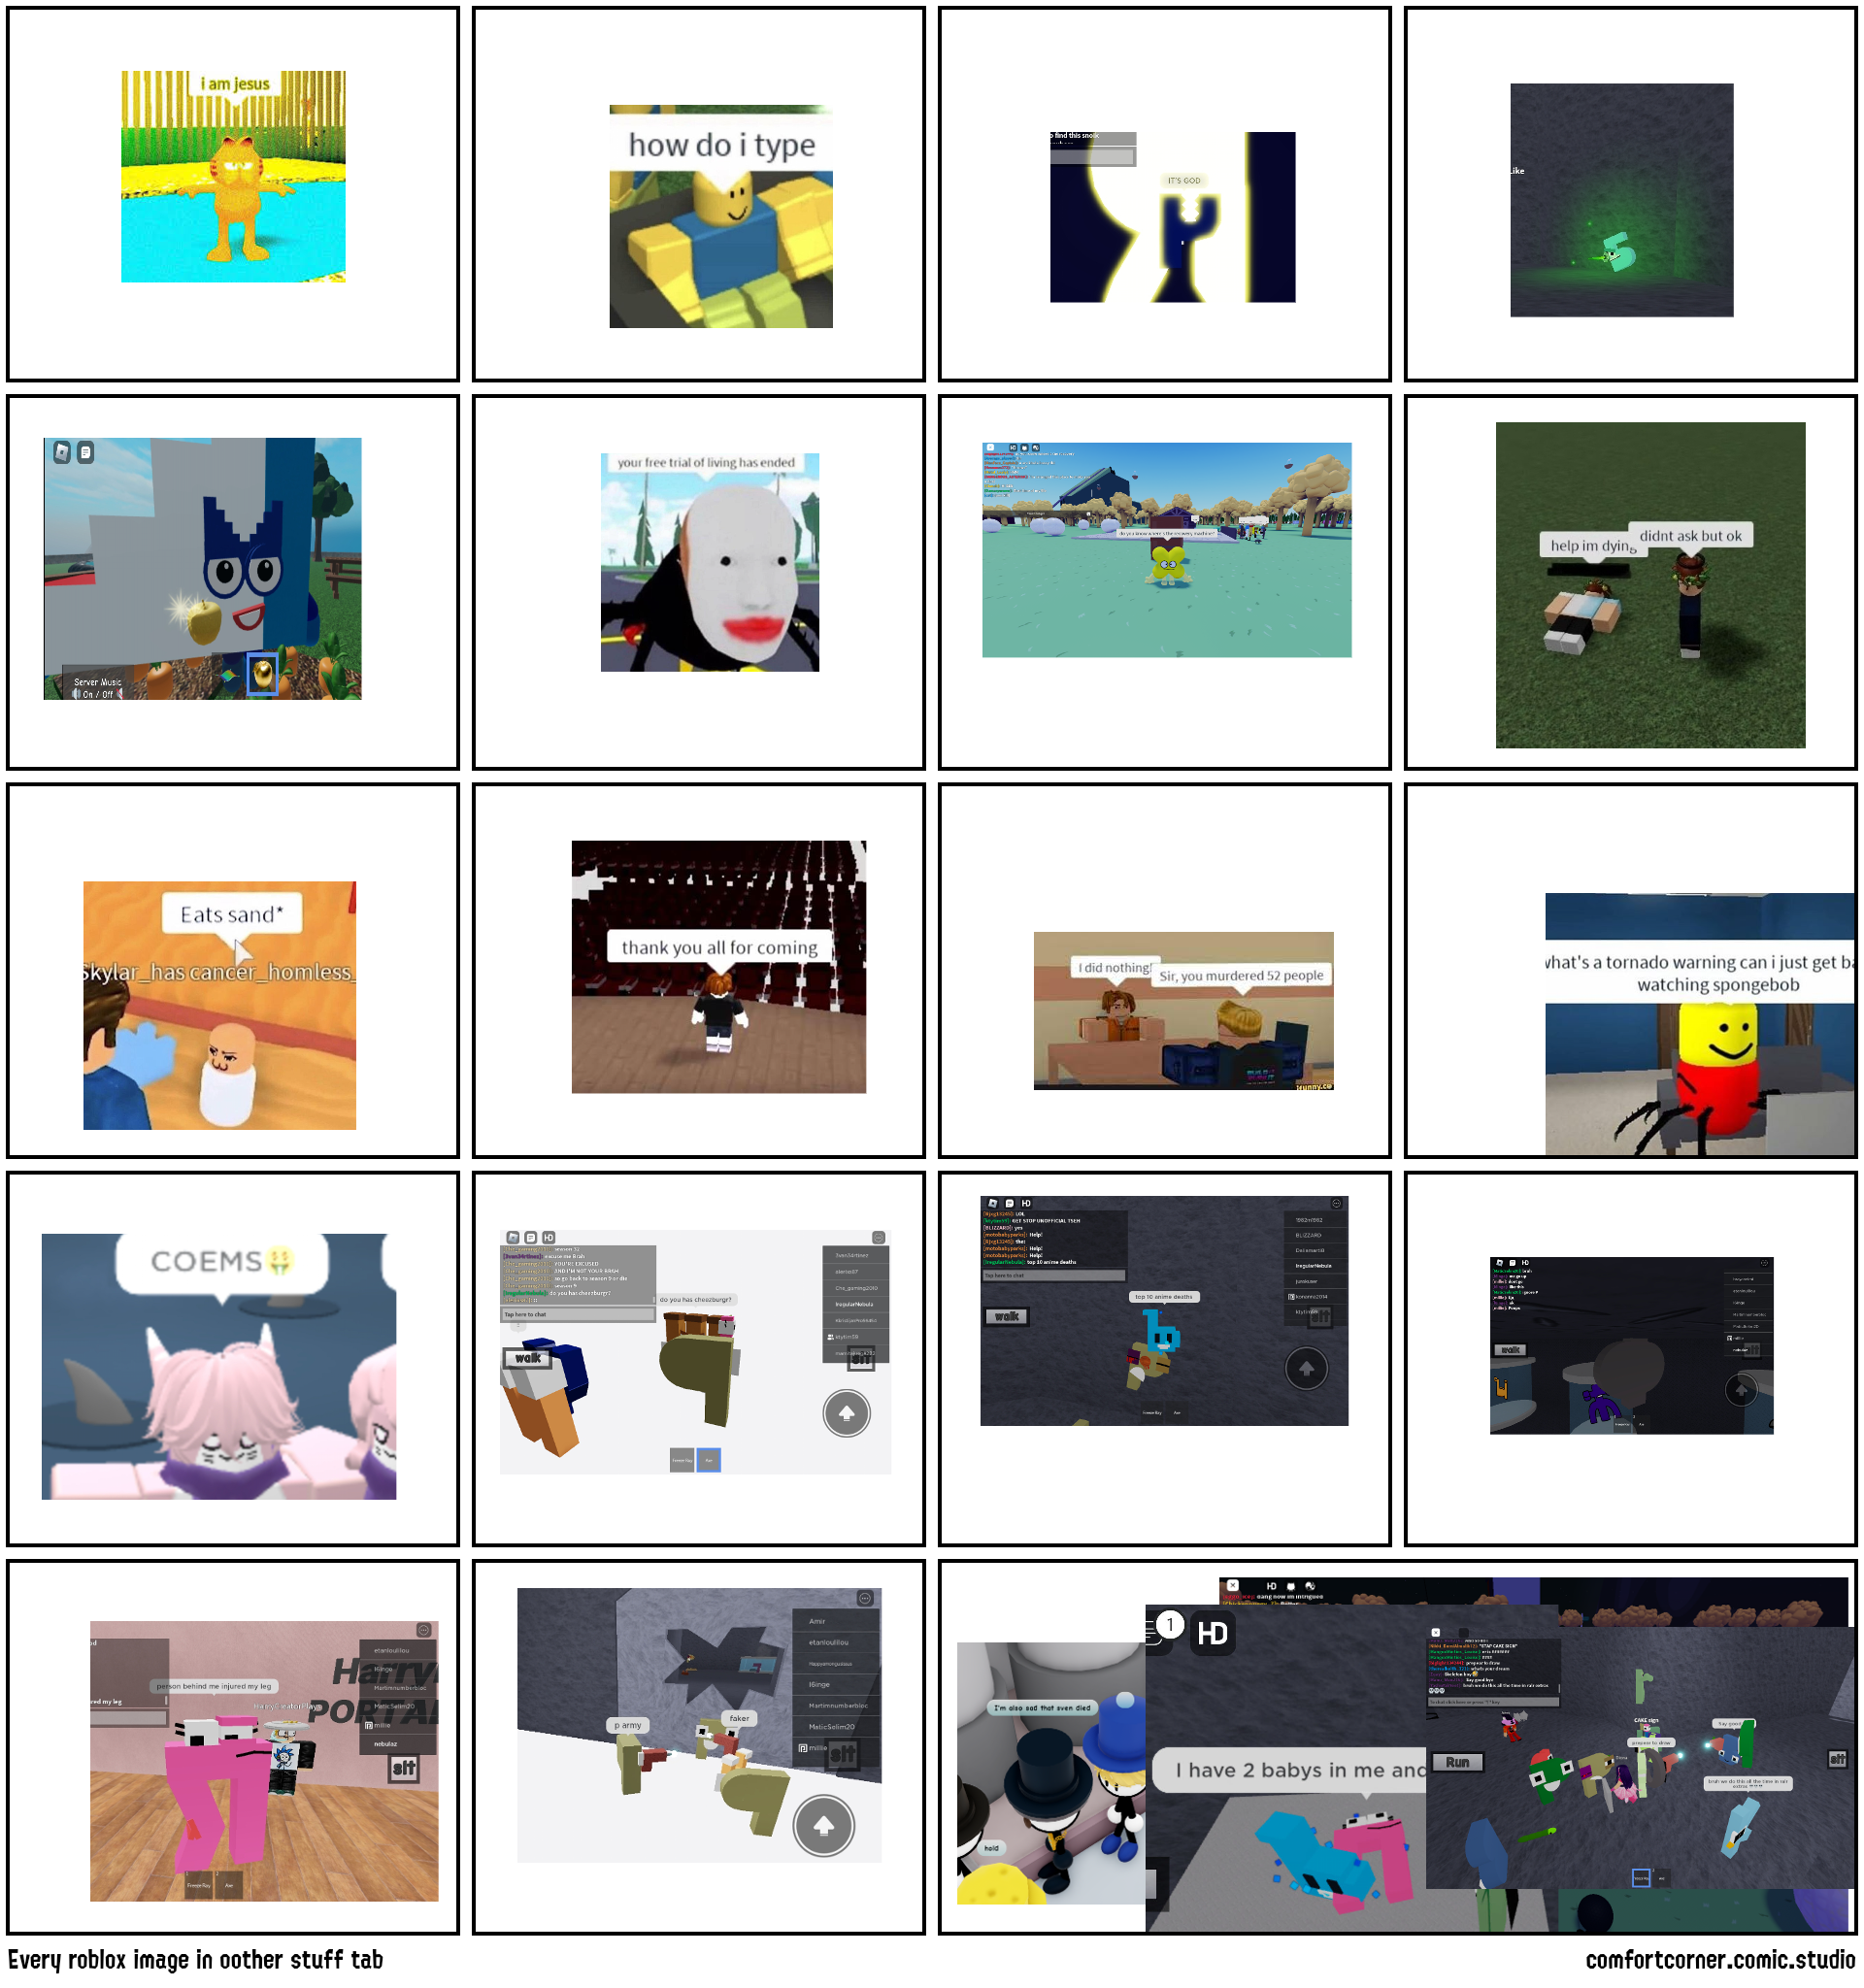 Every roblox image in oother stuff tab